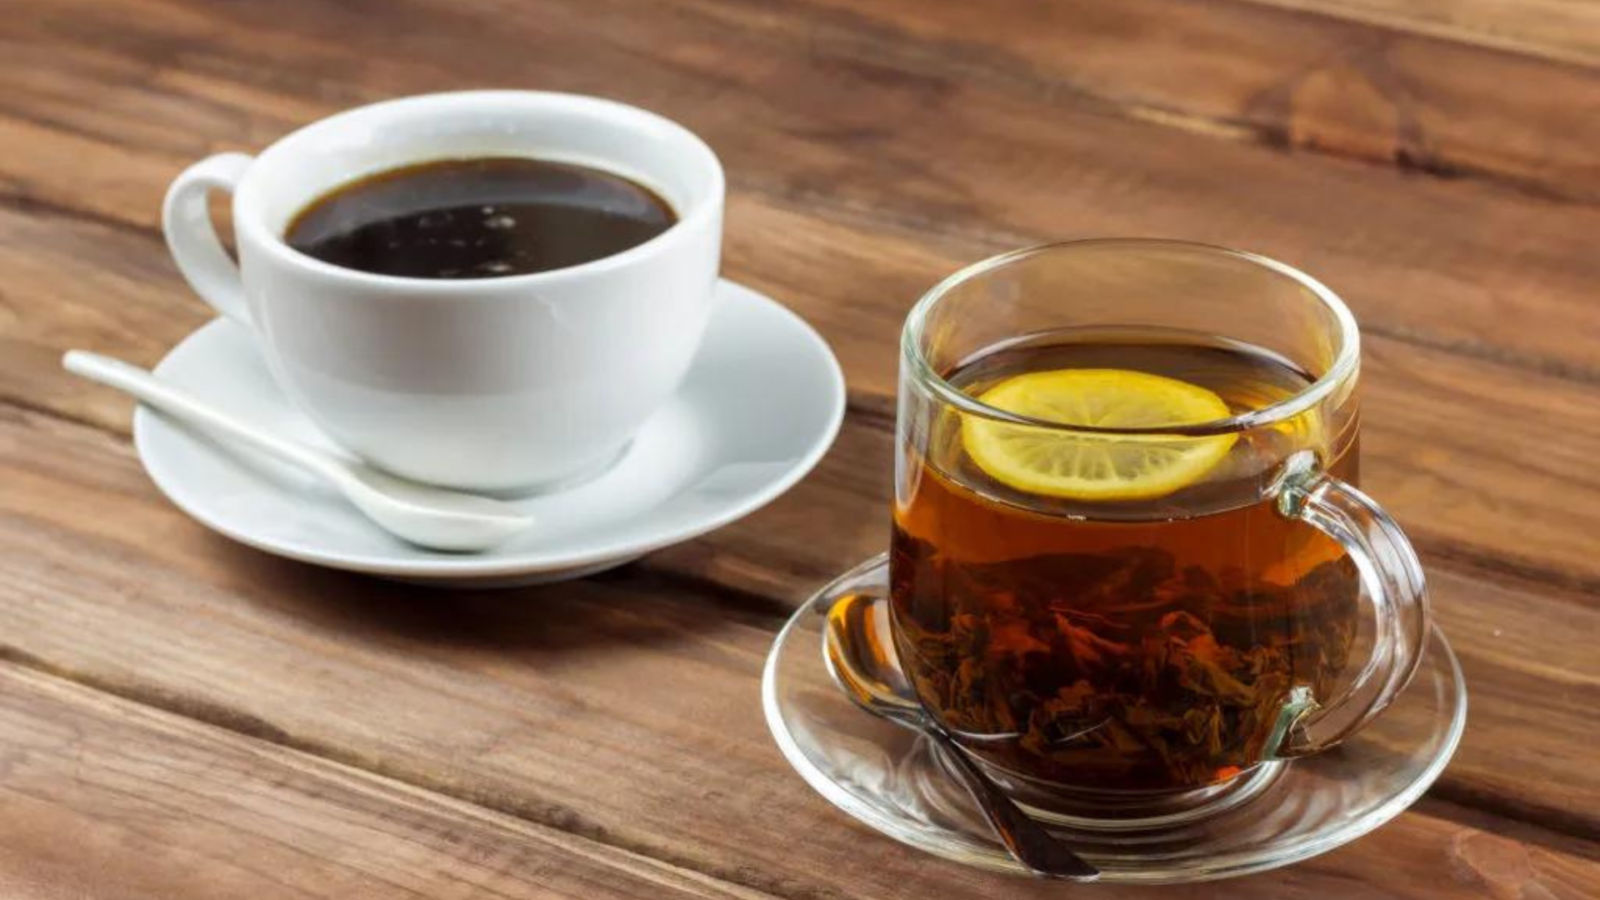 Tea vs. coffee, which drink is healthier for you?